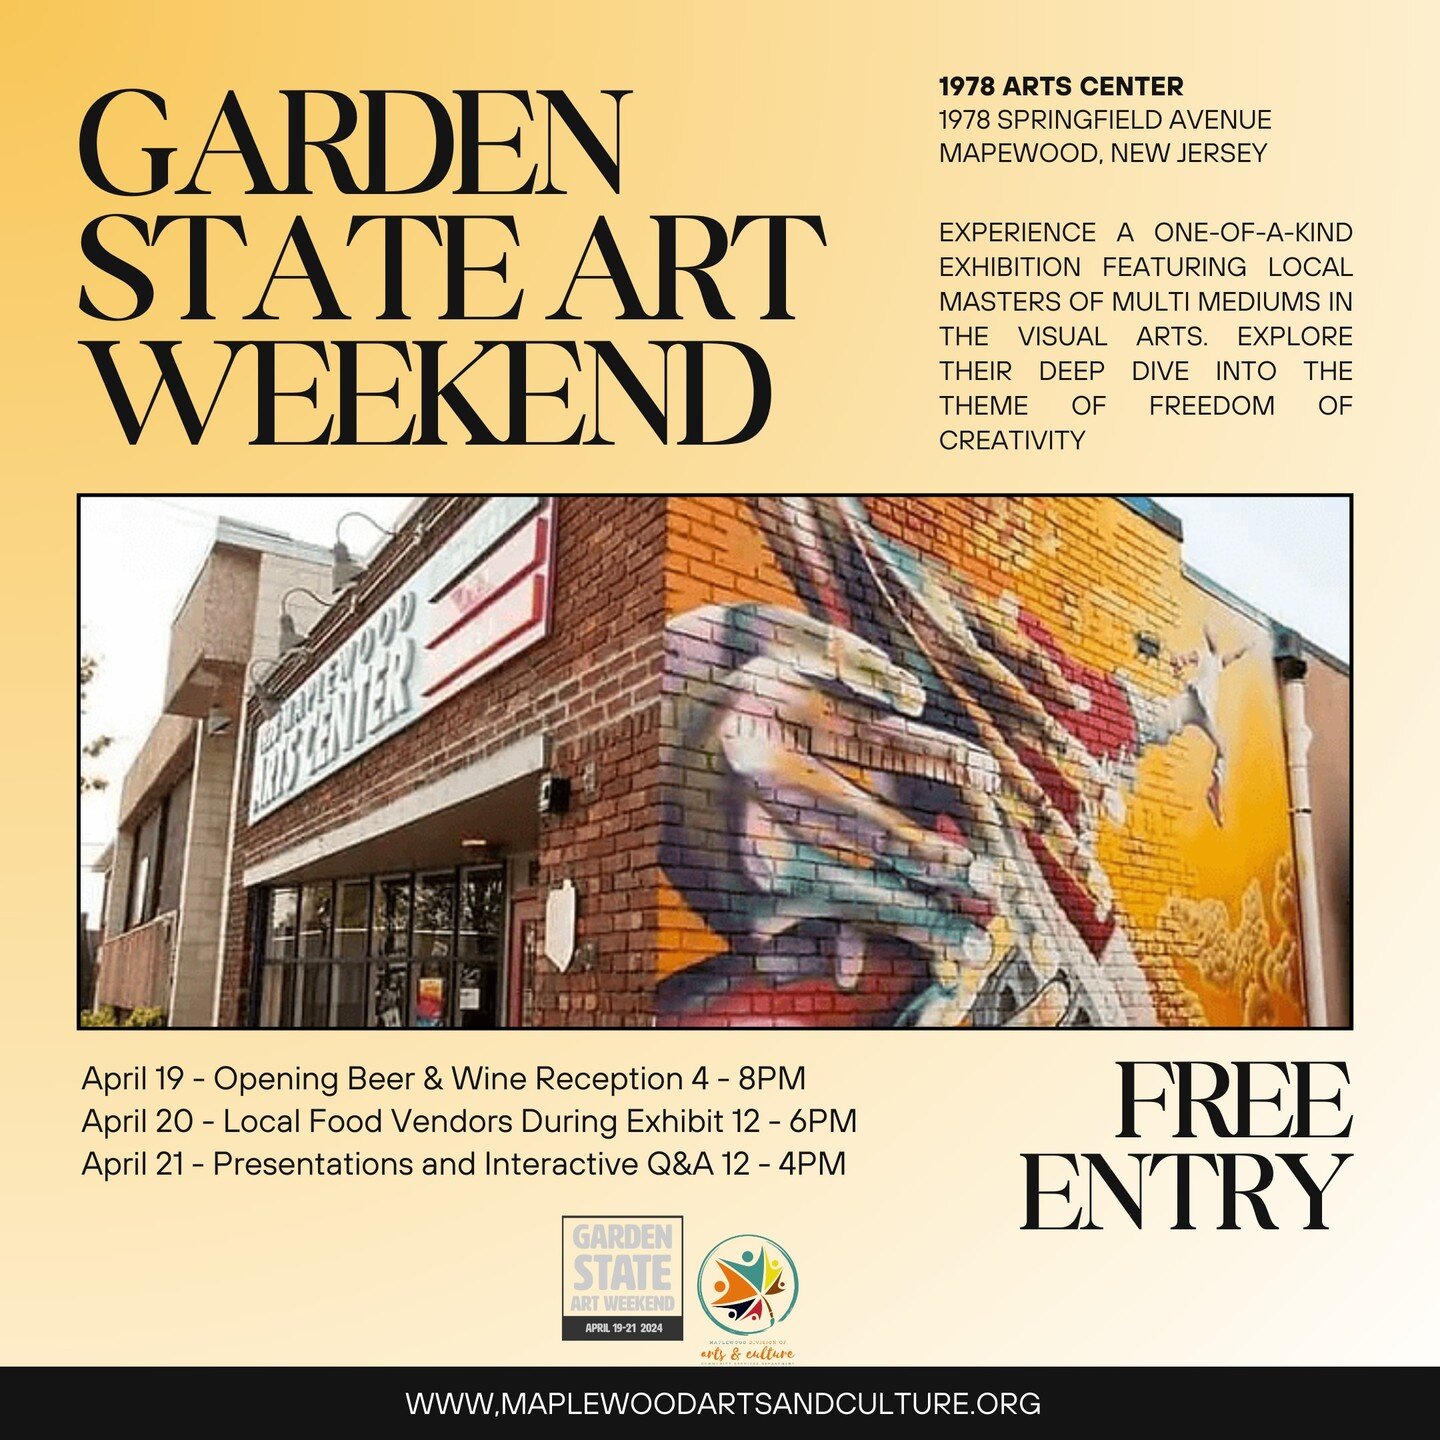 Garden State Art Weekend at 1978 Arts Center!

Get ready for a weekend filled with boundless creativity and artistic marvels! Join us at the exquisite Garden State Art Weekend, where art knows no bounds and creativity reigns supreme.

Experience a on